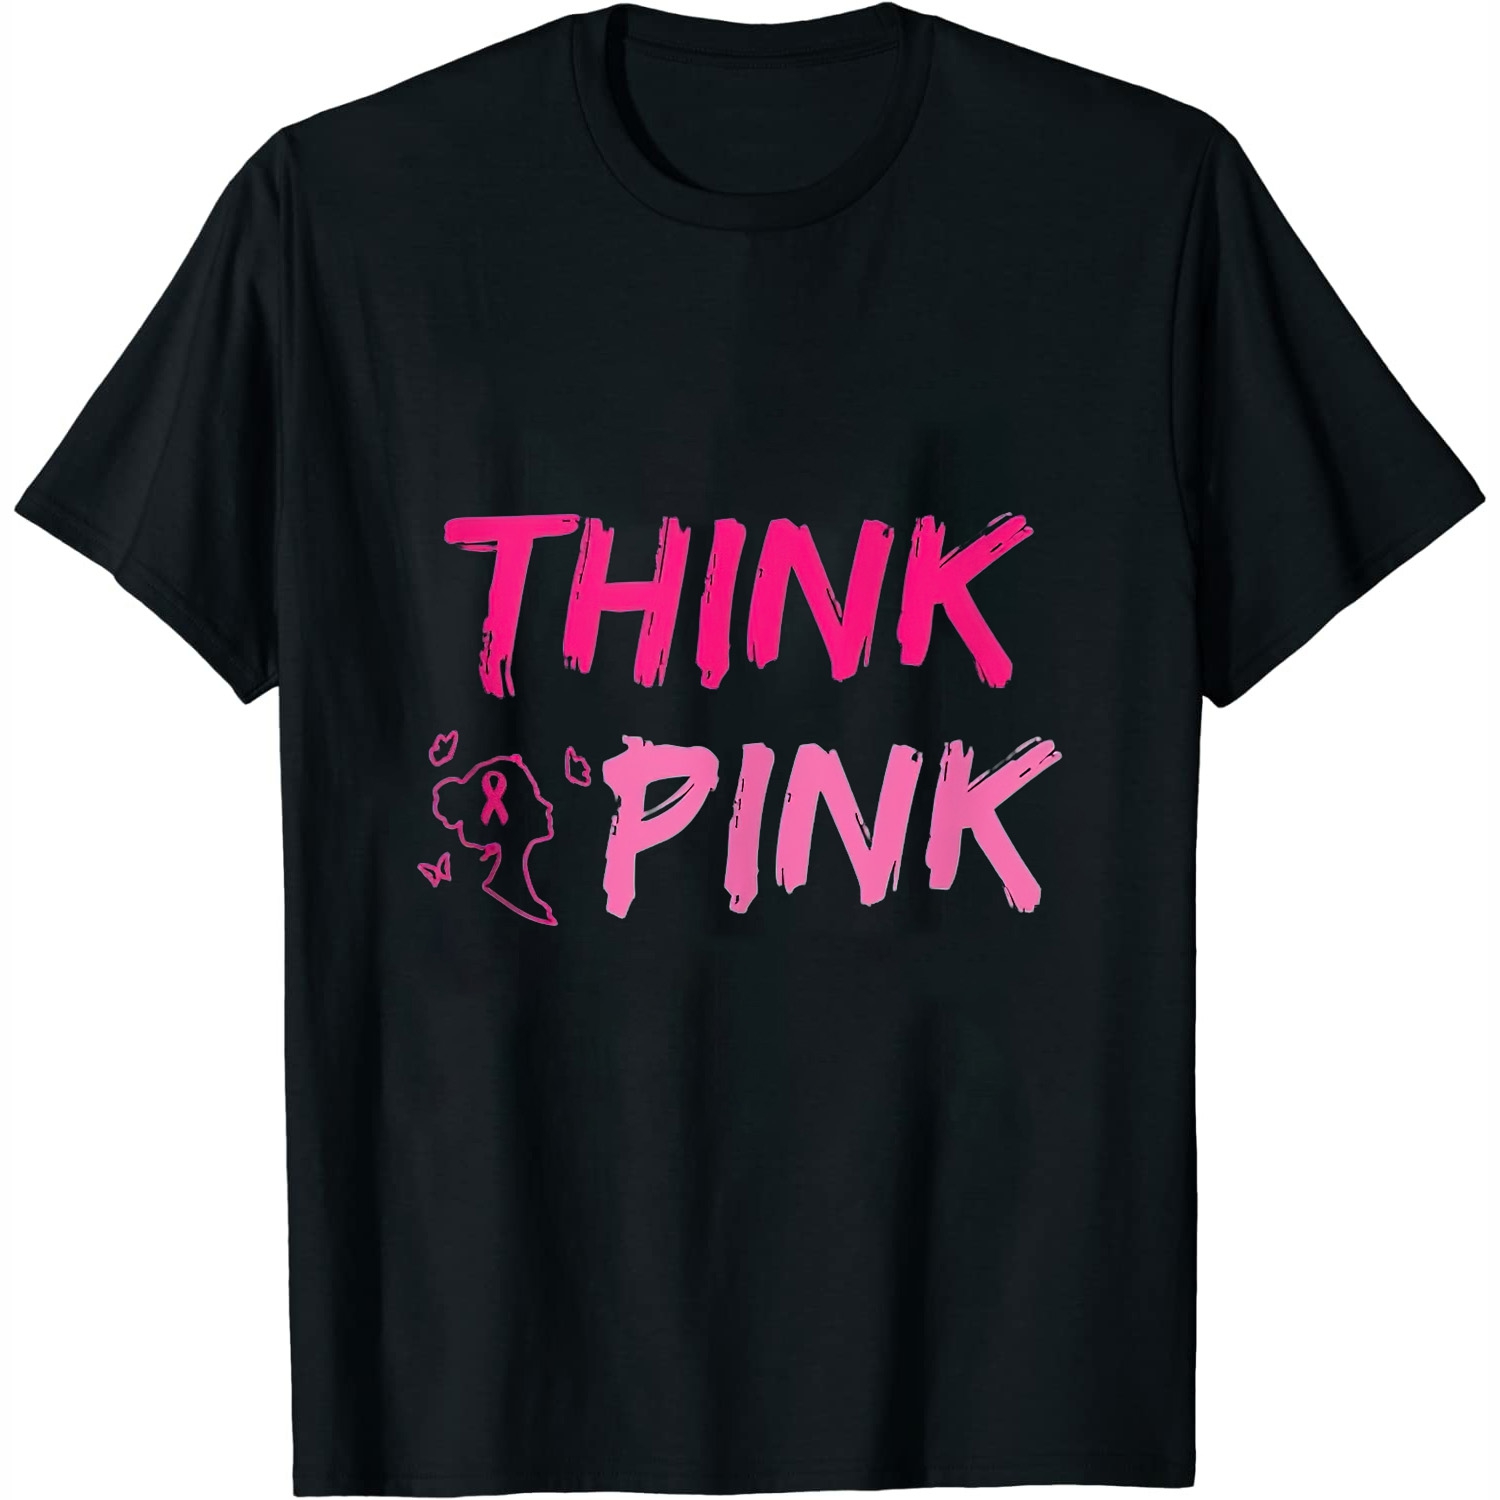 Think pink awareness design for breast cancer fighters T Shirt Black 4X ...